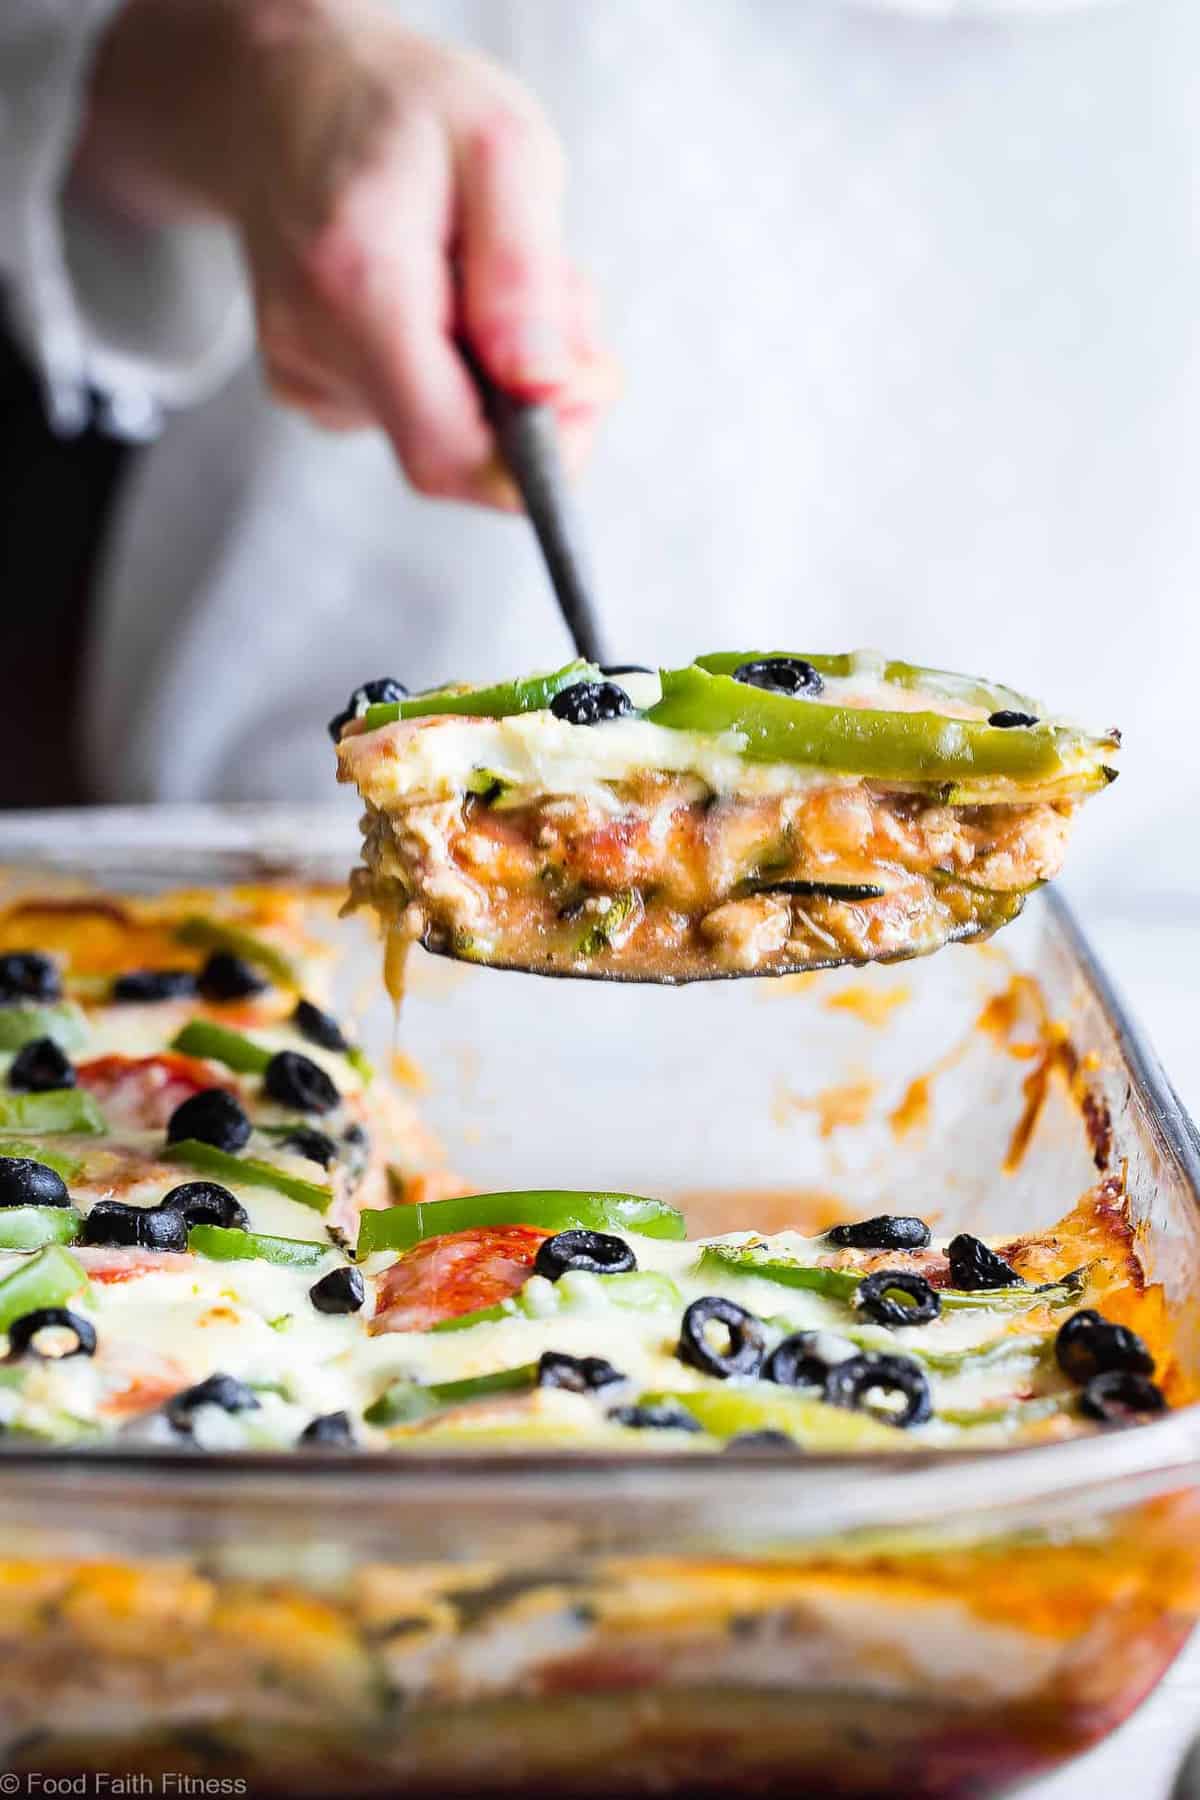 Low Carb Zucchini Pizza Lasagna - This zucchini lasagna combines 2 classic comfort foods into one healthy and kid friendly dinner! Gluten free, under 300 calories and packed with protein too! | #Foodfaithfitness.com | #Glutenfree #Lowcarb #Healthy #KidFriendly #Lasagna